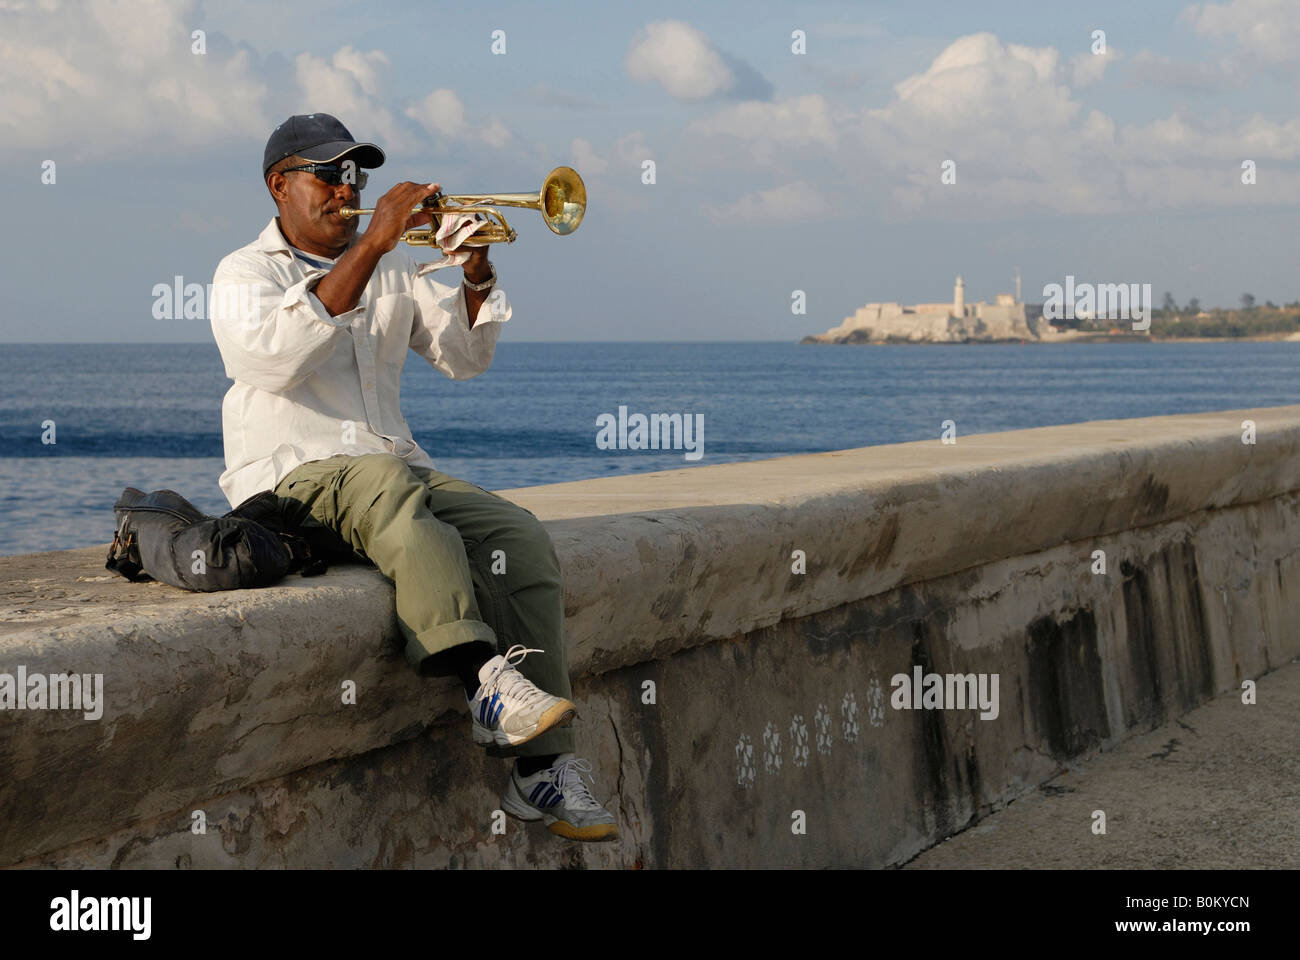 A middle aged man sitting on a wall and playing trumpet at the Malecon Boulevard in Havana Cuba April 2007 Stock Photo